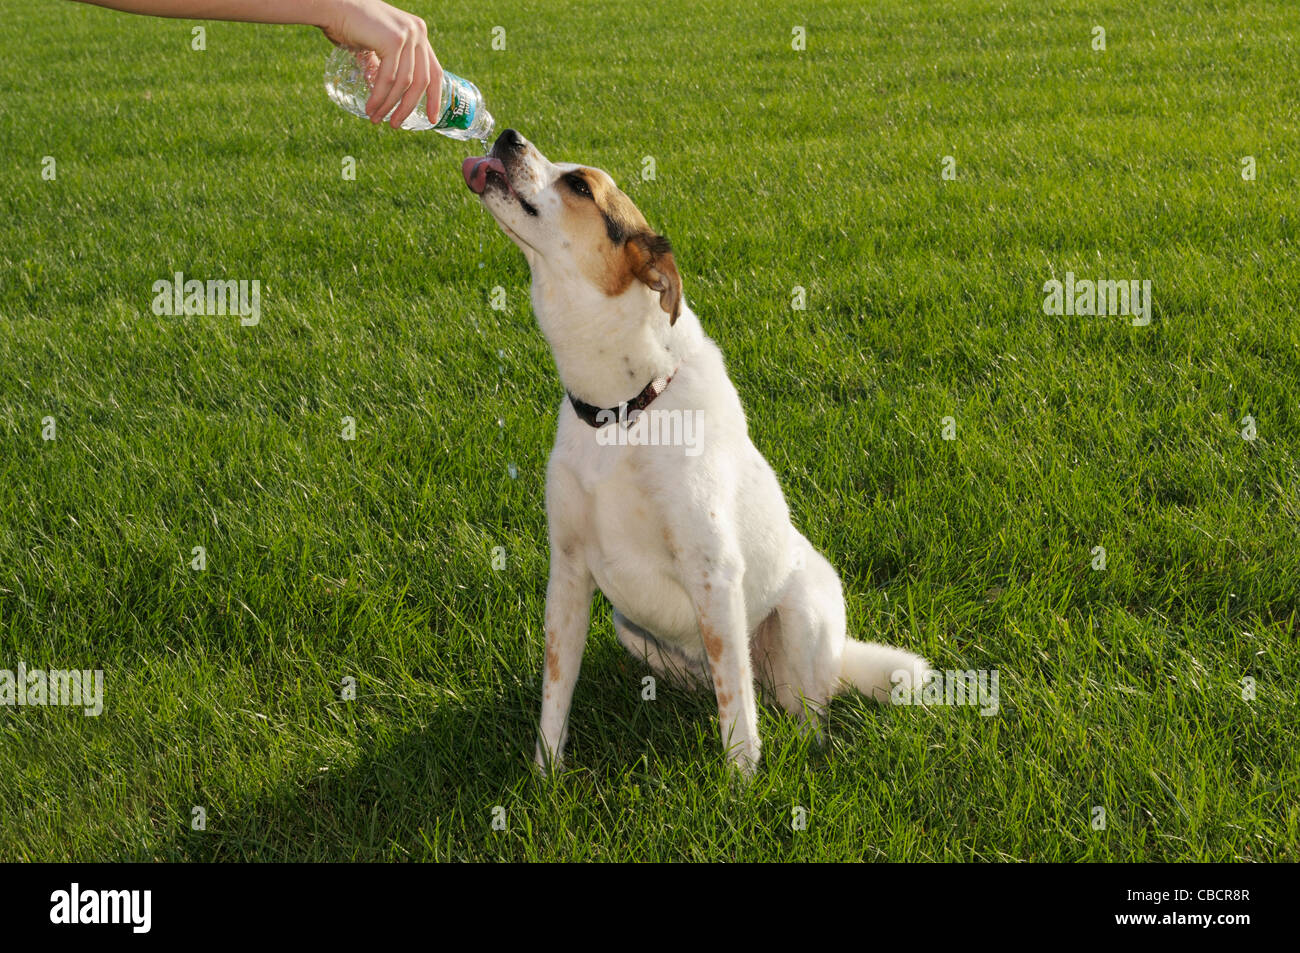 Dog drinking water from a bottle Stock Photo